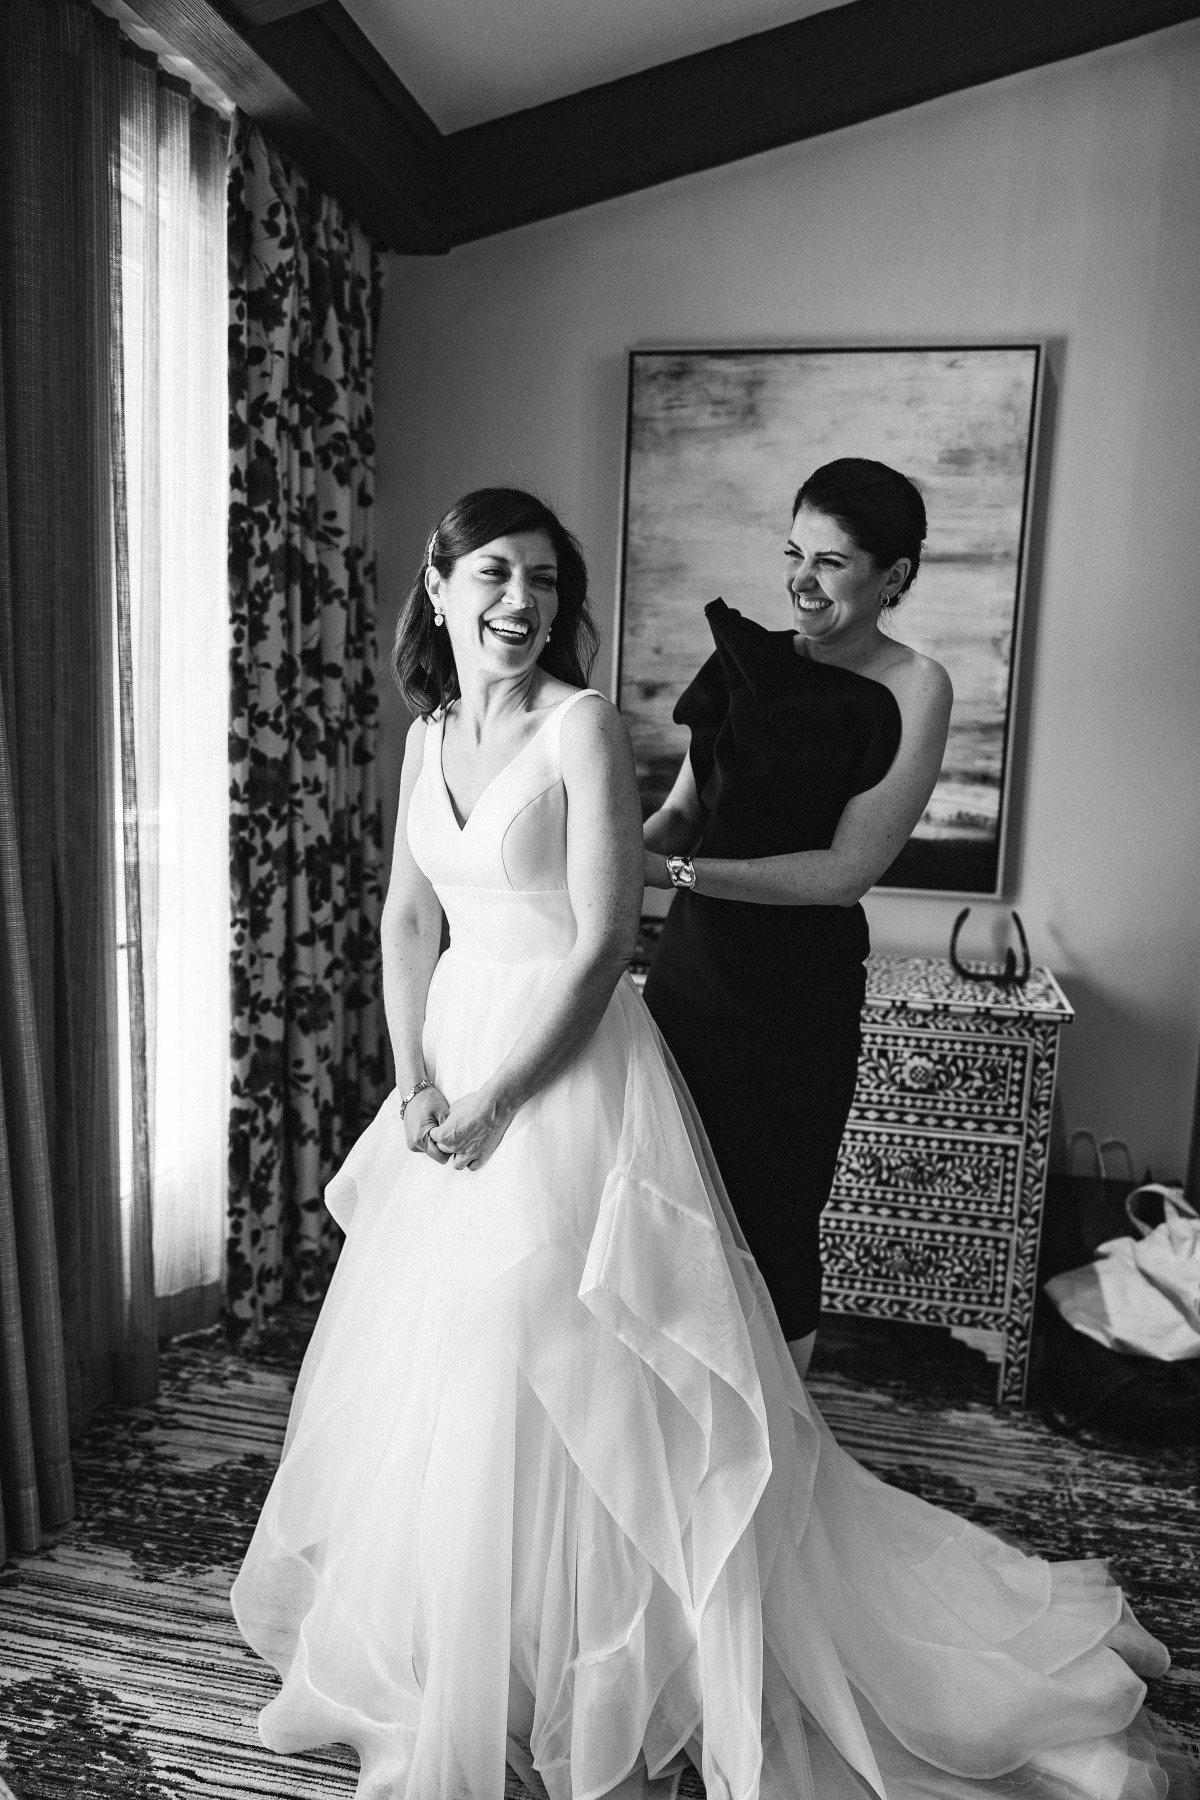 Bride getting dressed in ball gown with layers of tulle